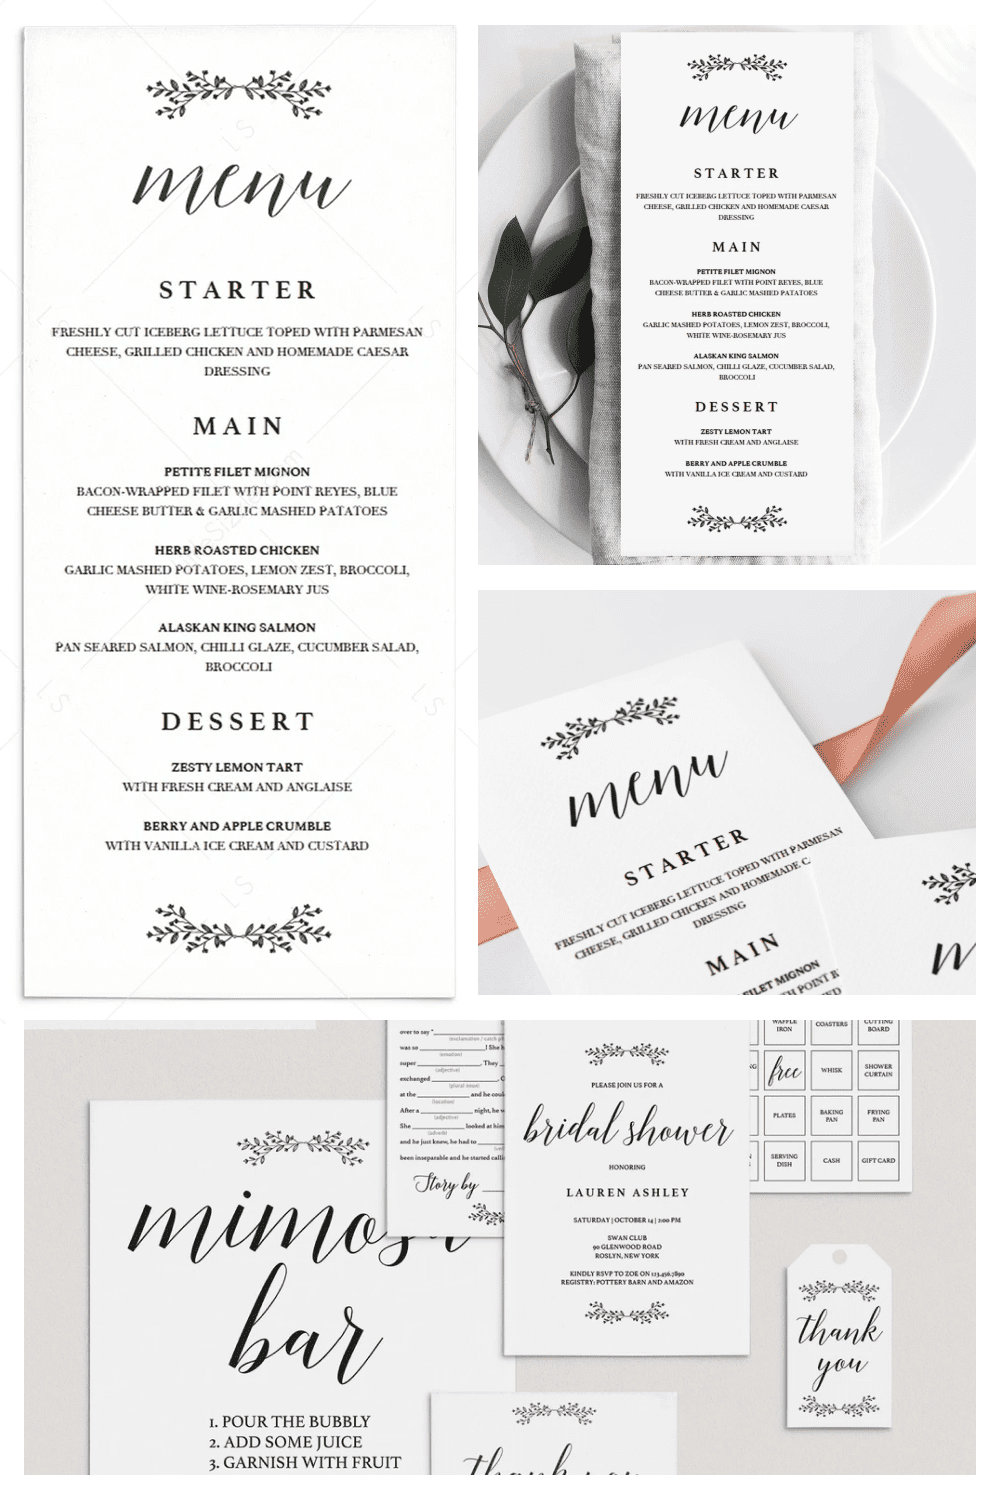 Finish off your dinner party table setting with this simple, yet sophisticated black and white menu card template with tiny leaves. It's the perfect addition to any event.